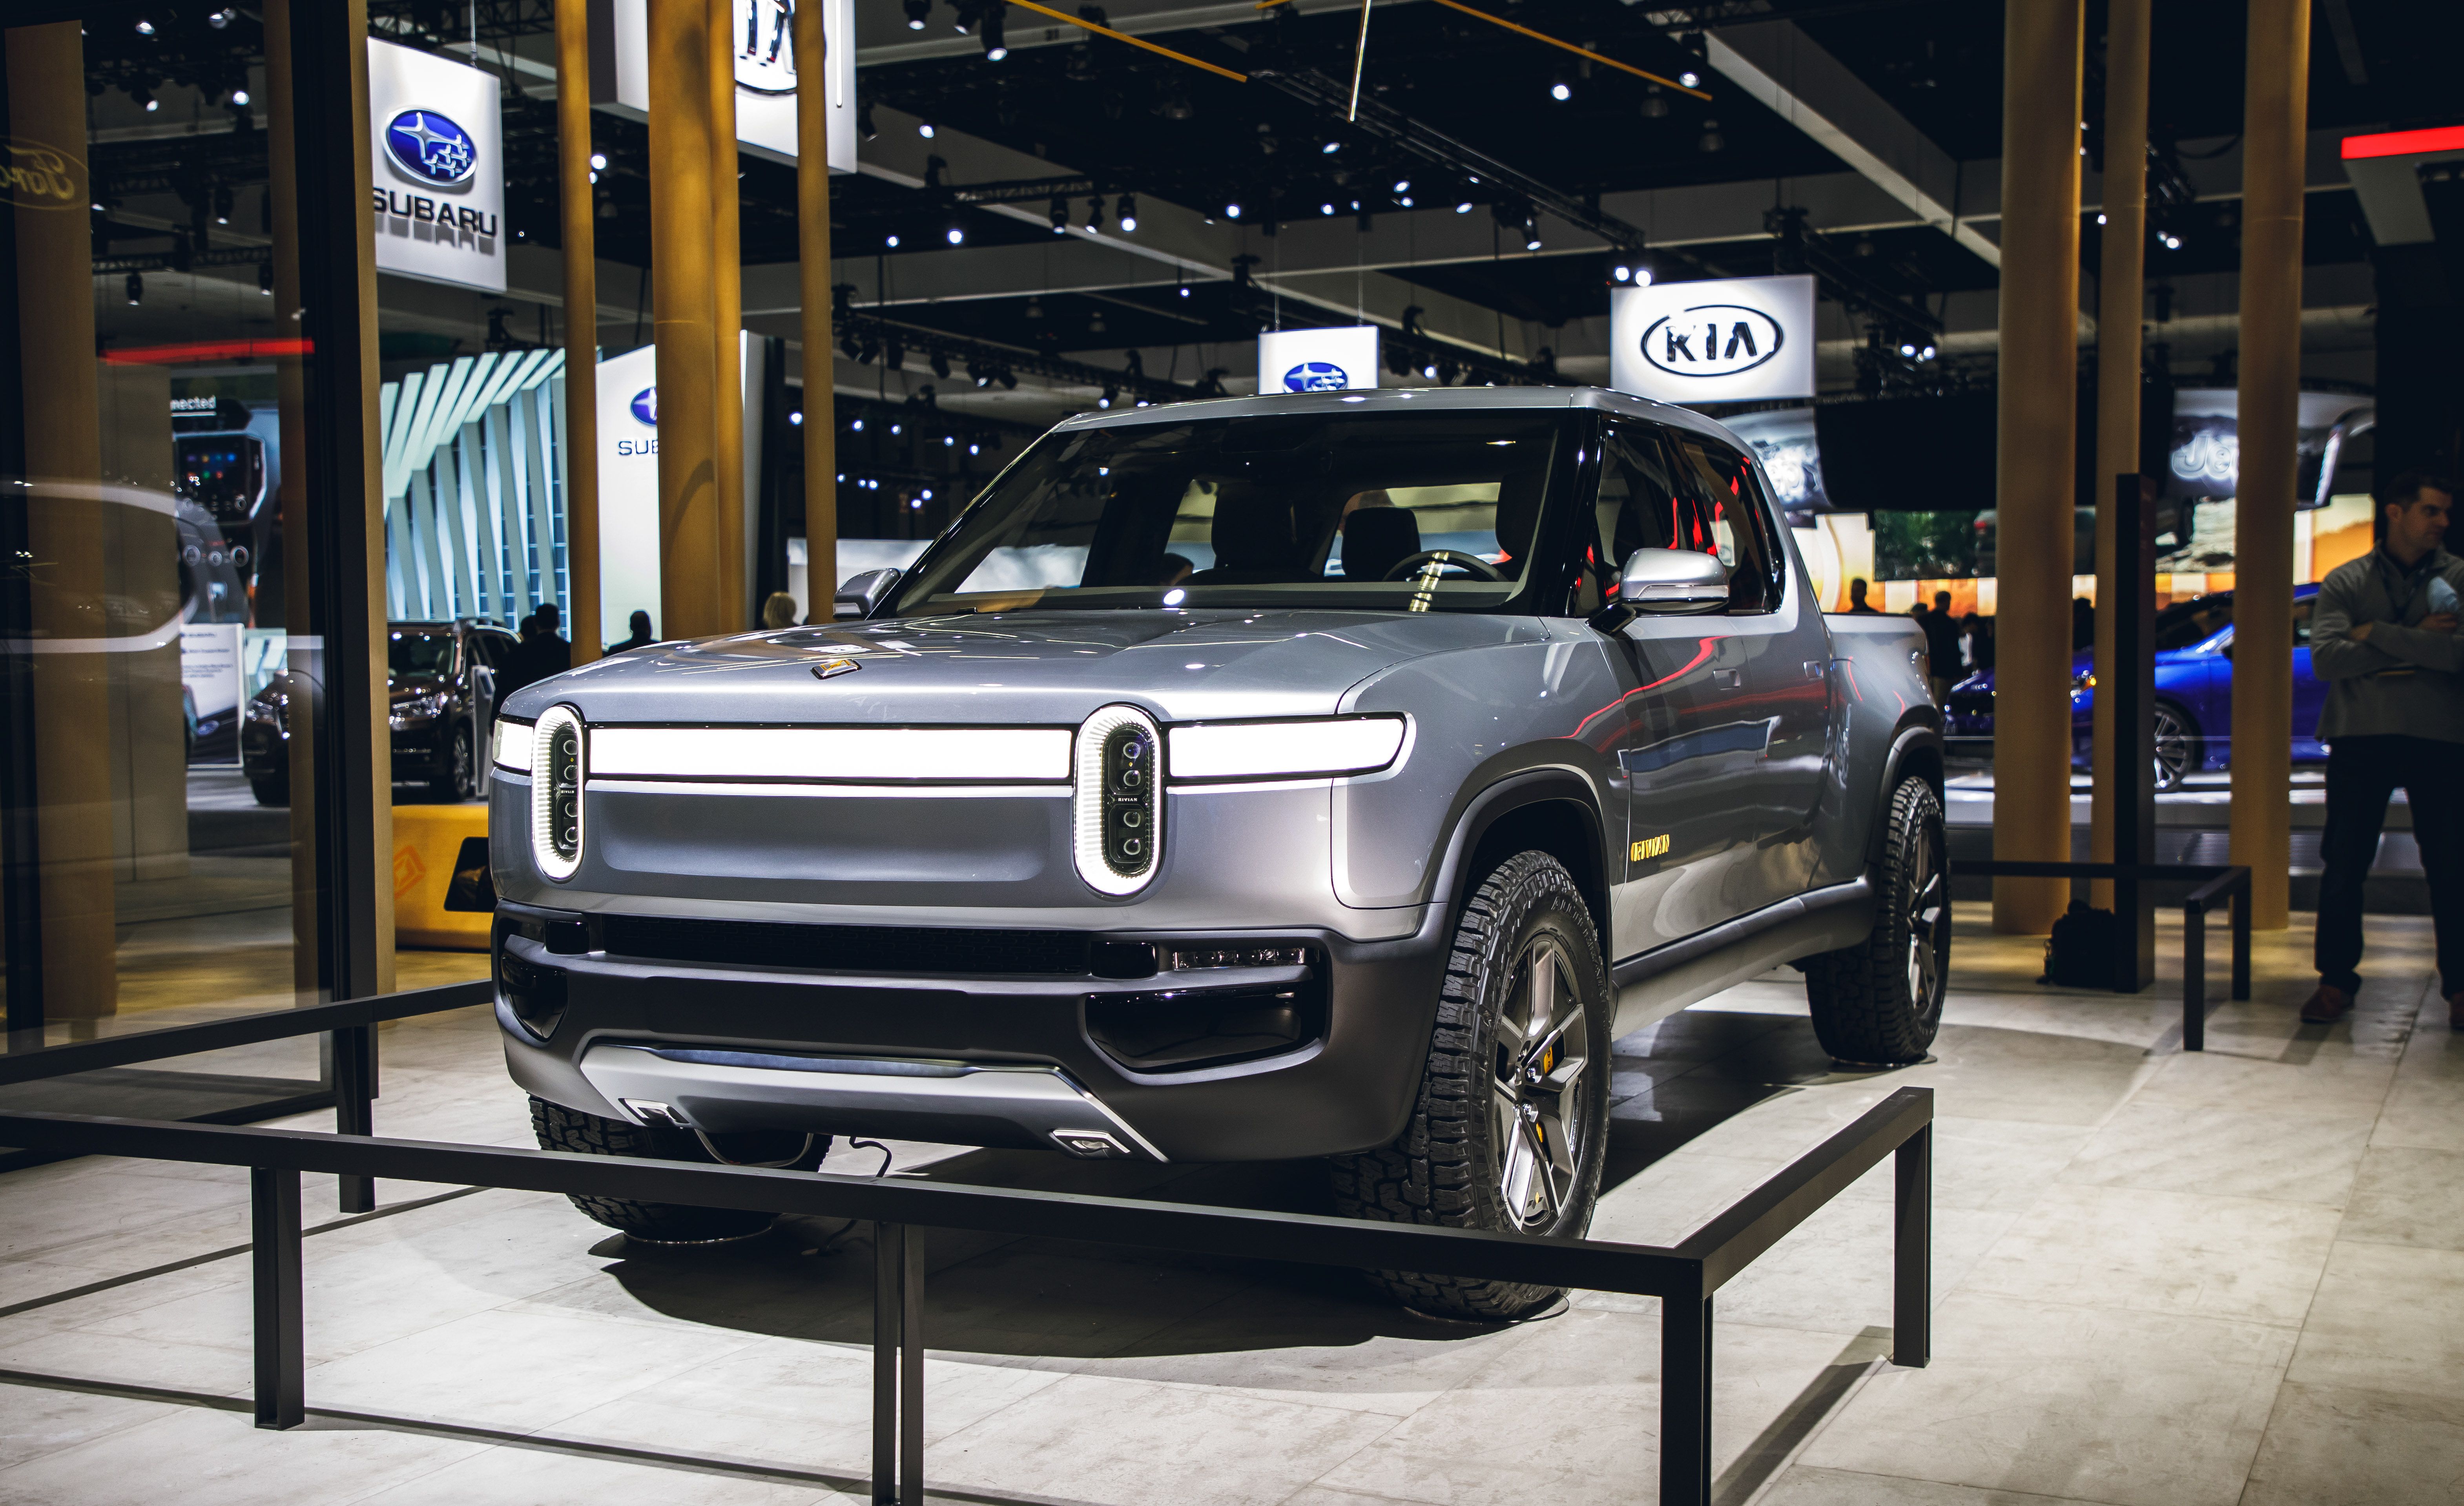 2021 Rivian R1t Electric Pickup Details And Release Date